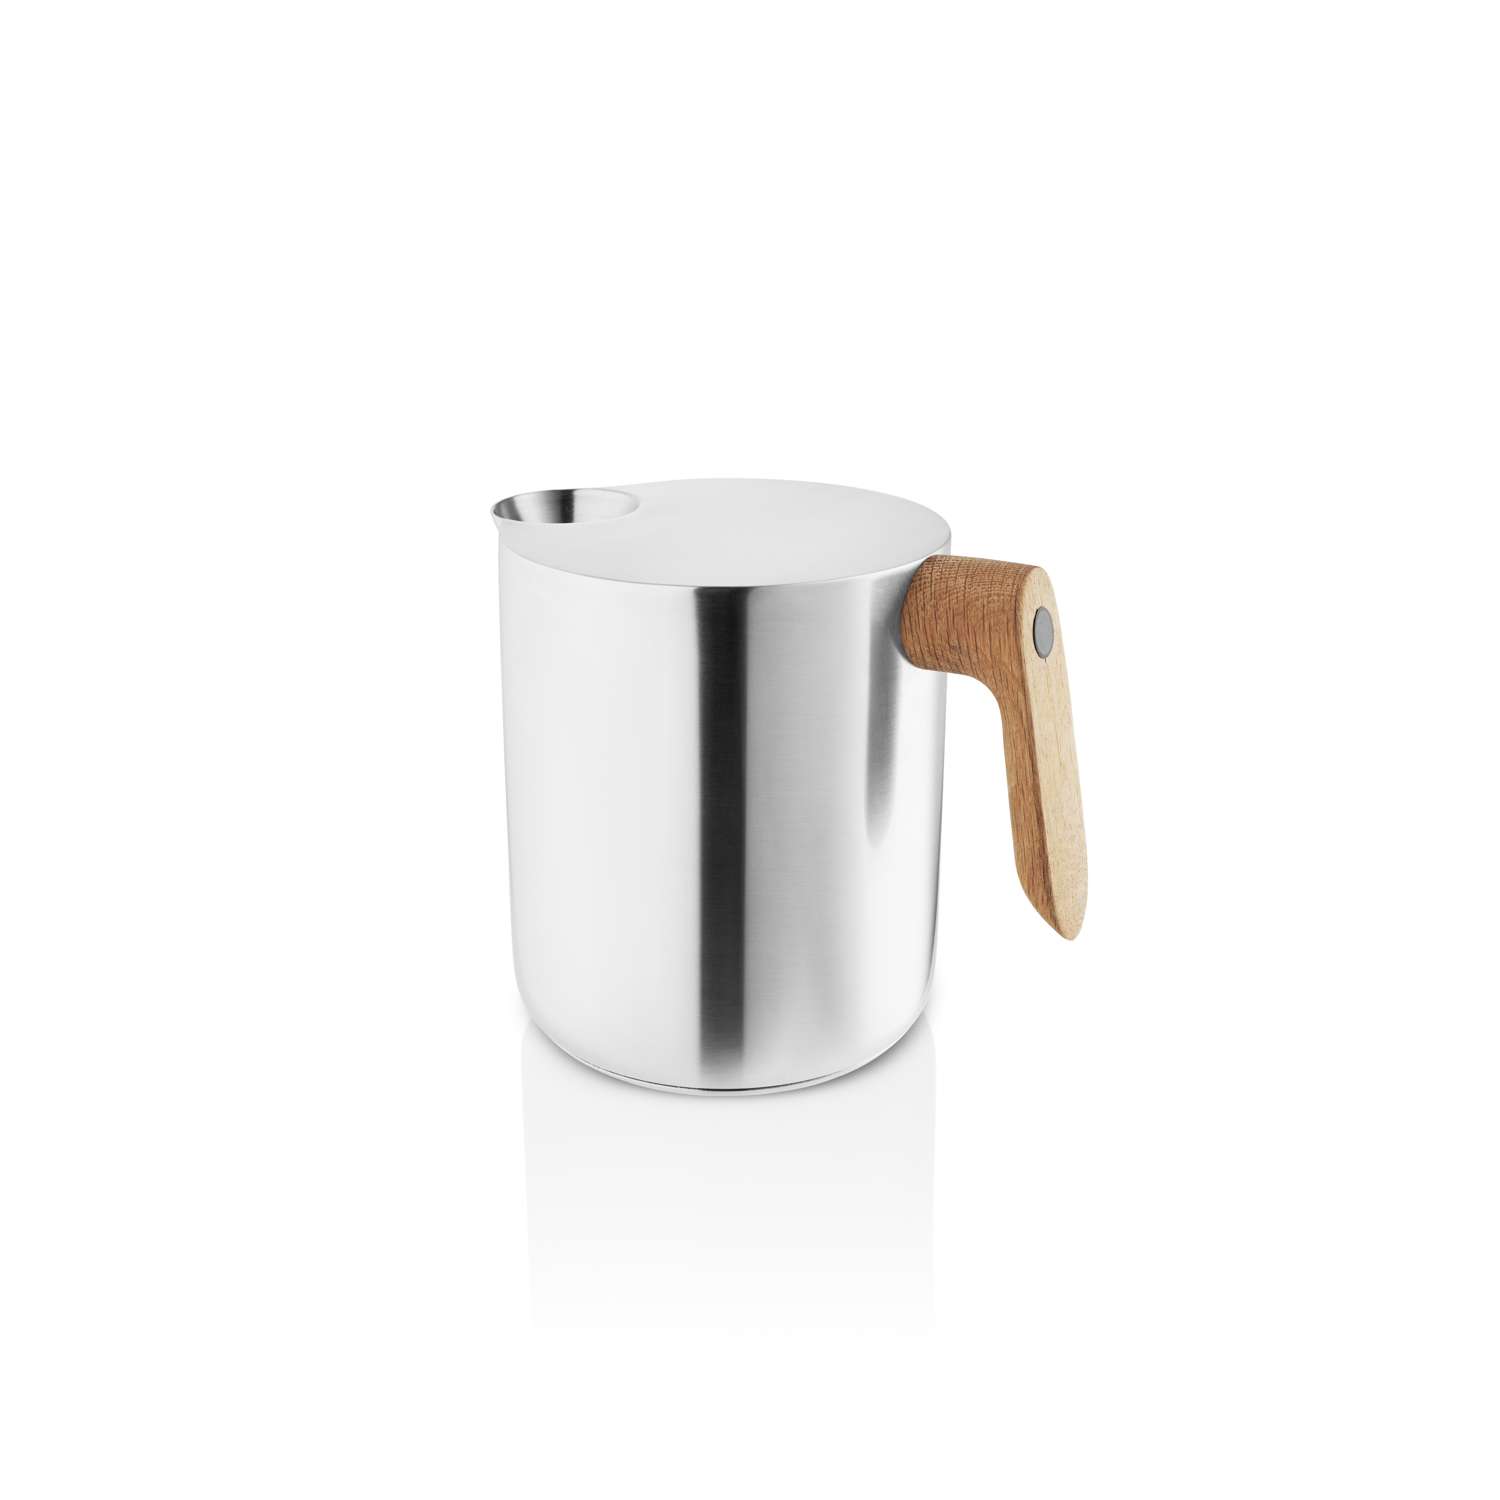 https://www.evasolo.com/%2FFiles%2FImages%2FPlytix%2FProduct_Photo_5%2F502925_Nordic_Kitchen_induction_kettle_Stainless_steel_vinkel_aRGB_High.jpg